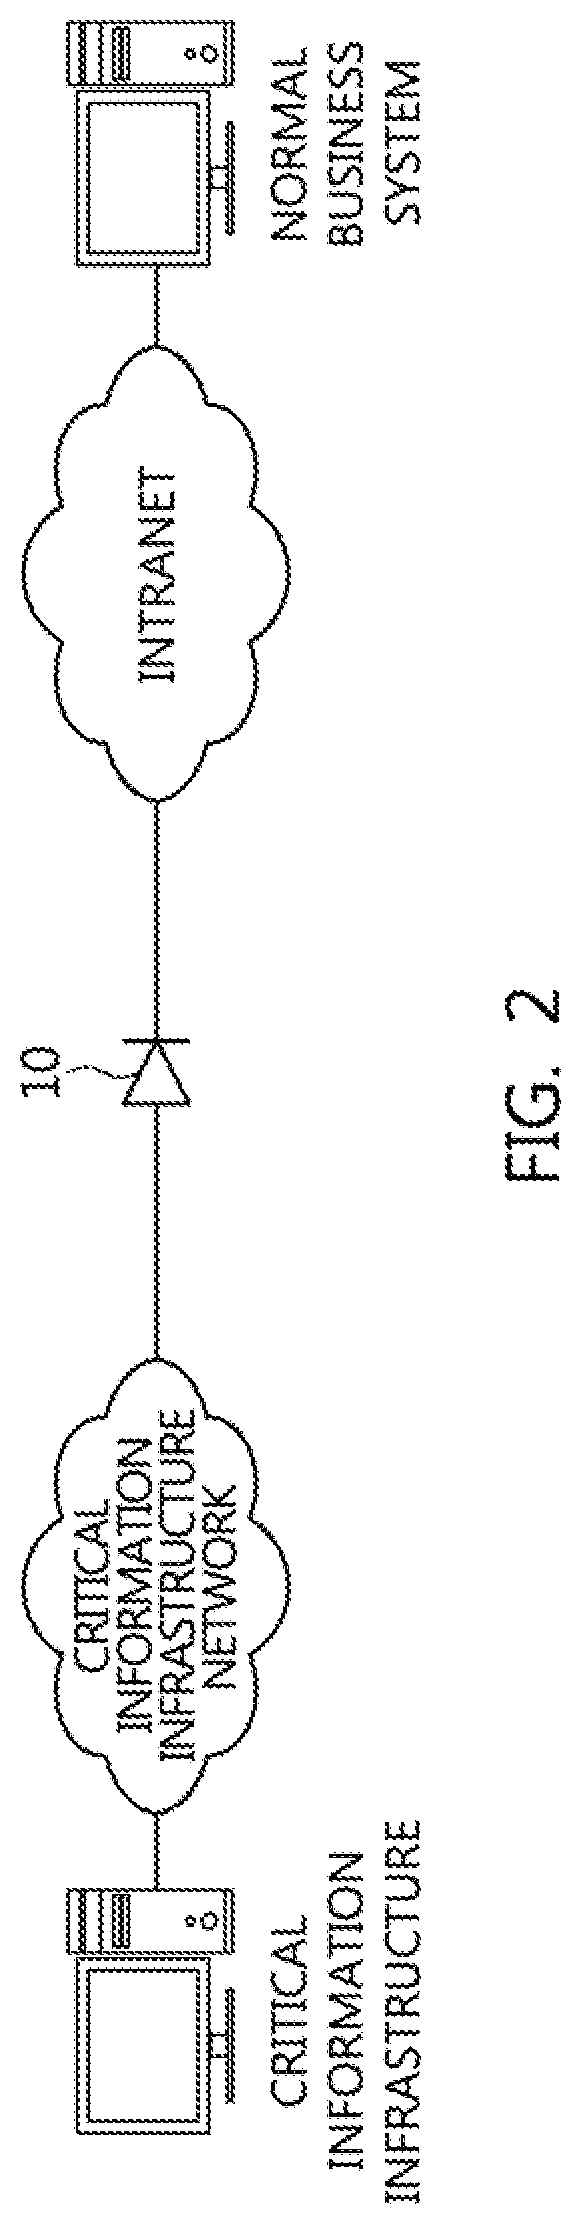 Data transmission system and method in physical network separation environment